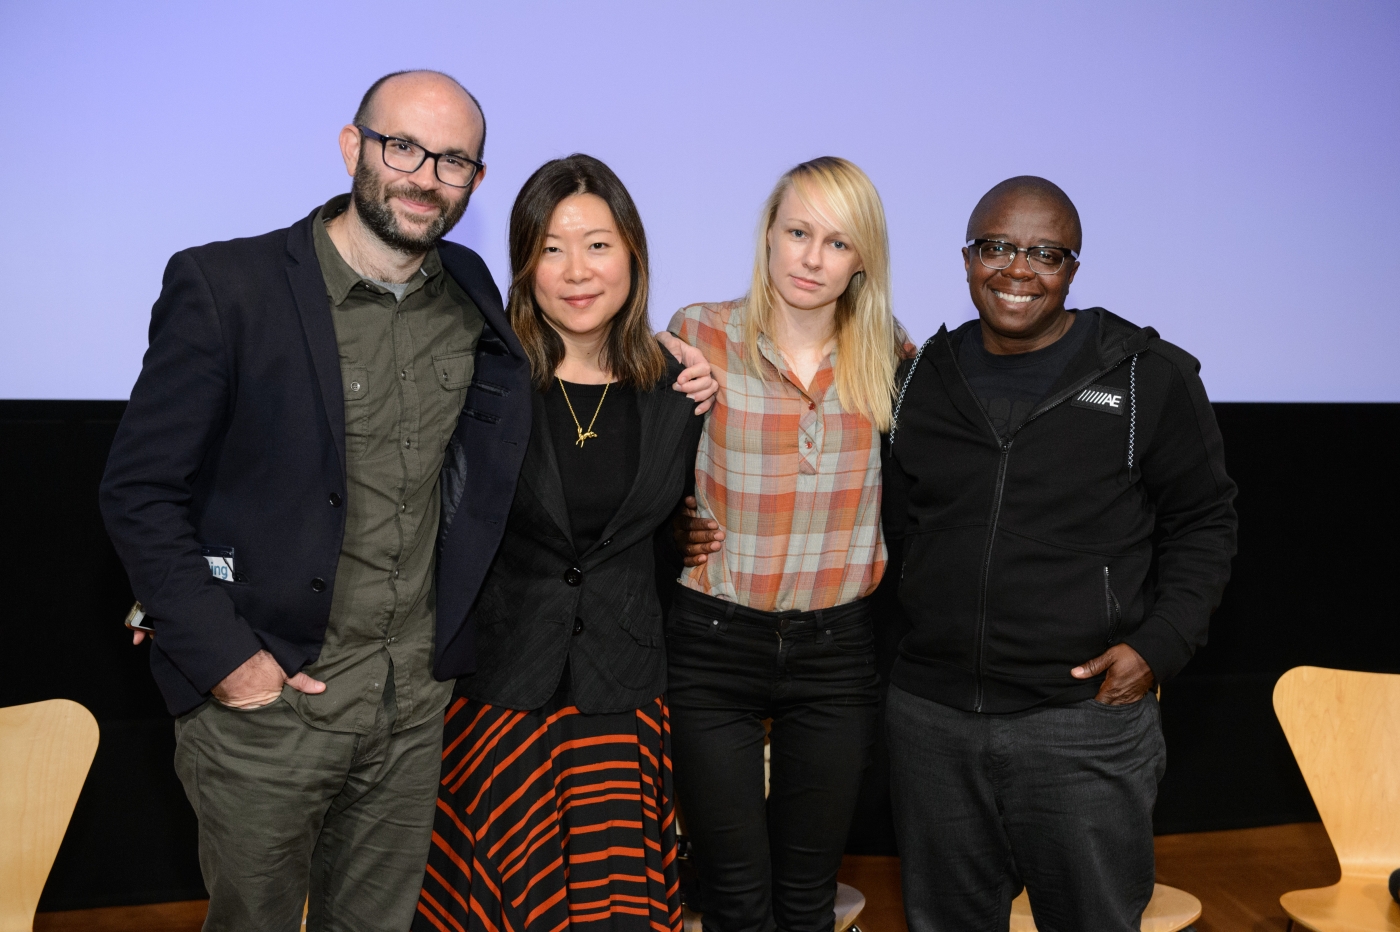 From left to right: filmmakers Robert Greene, Sandi Tan, Kitty Green and Yance Ford. Courtesy of AMPAS